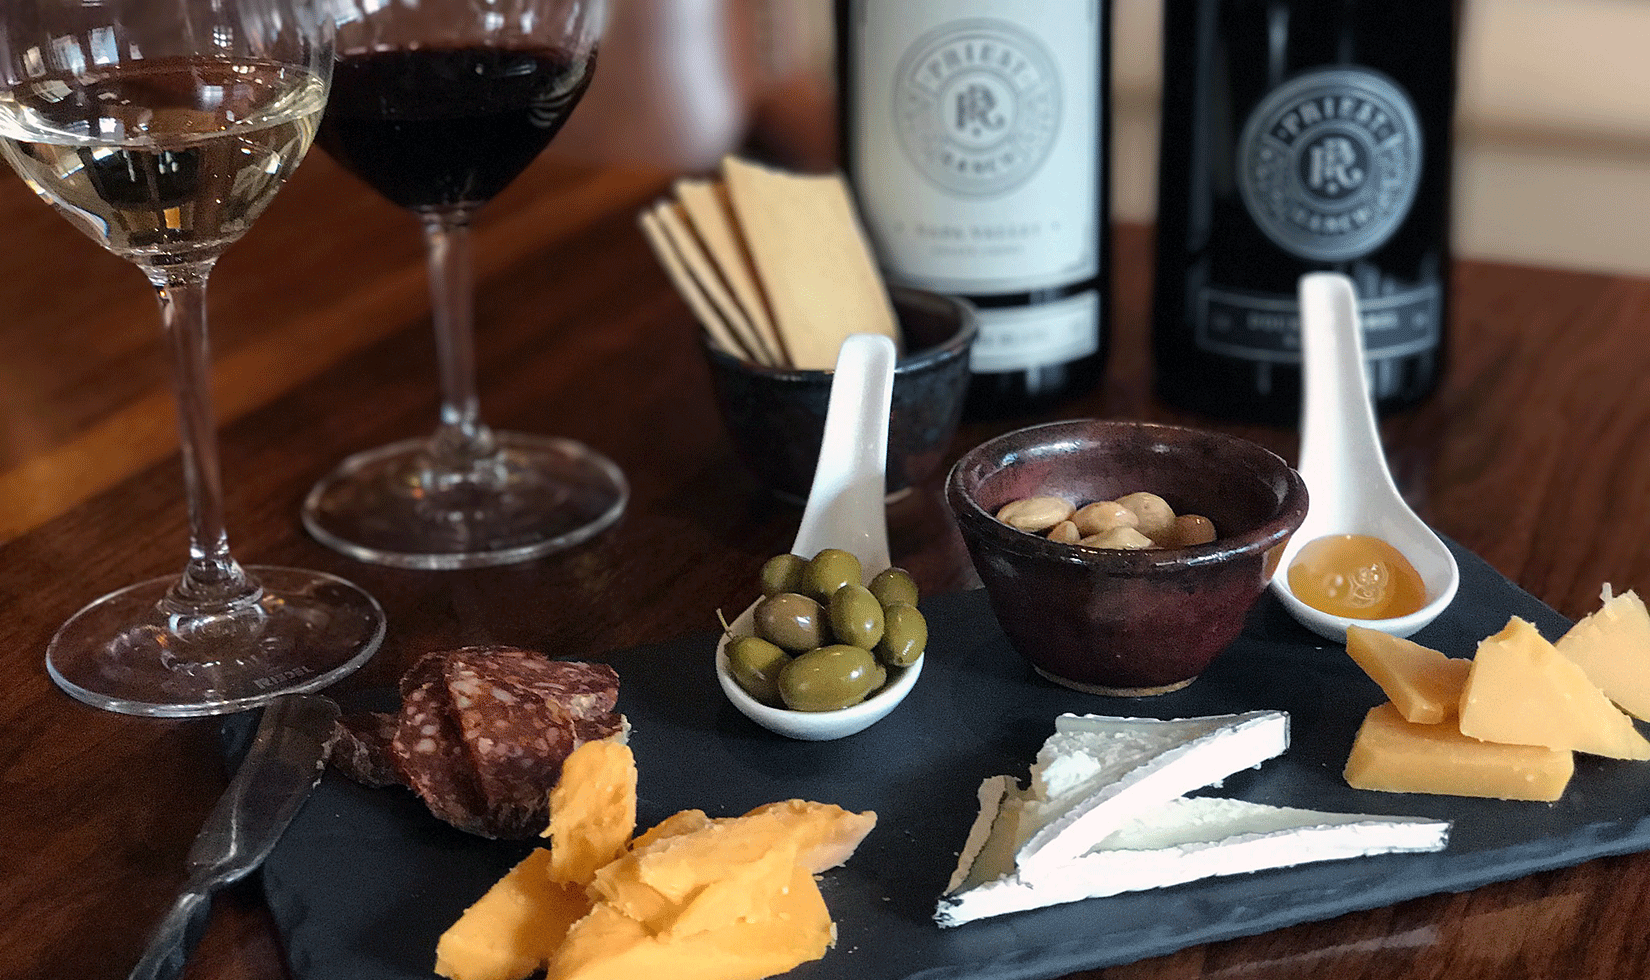 cheese and wine tasting with pickles, bread and biscuits